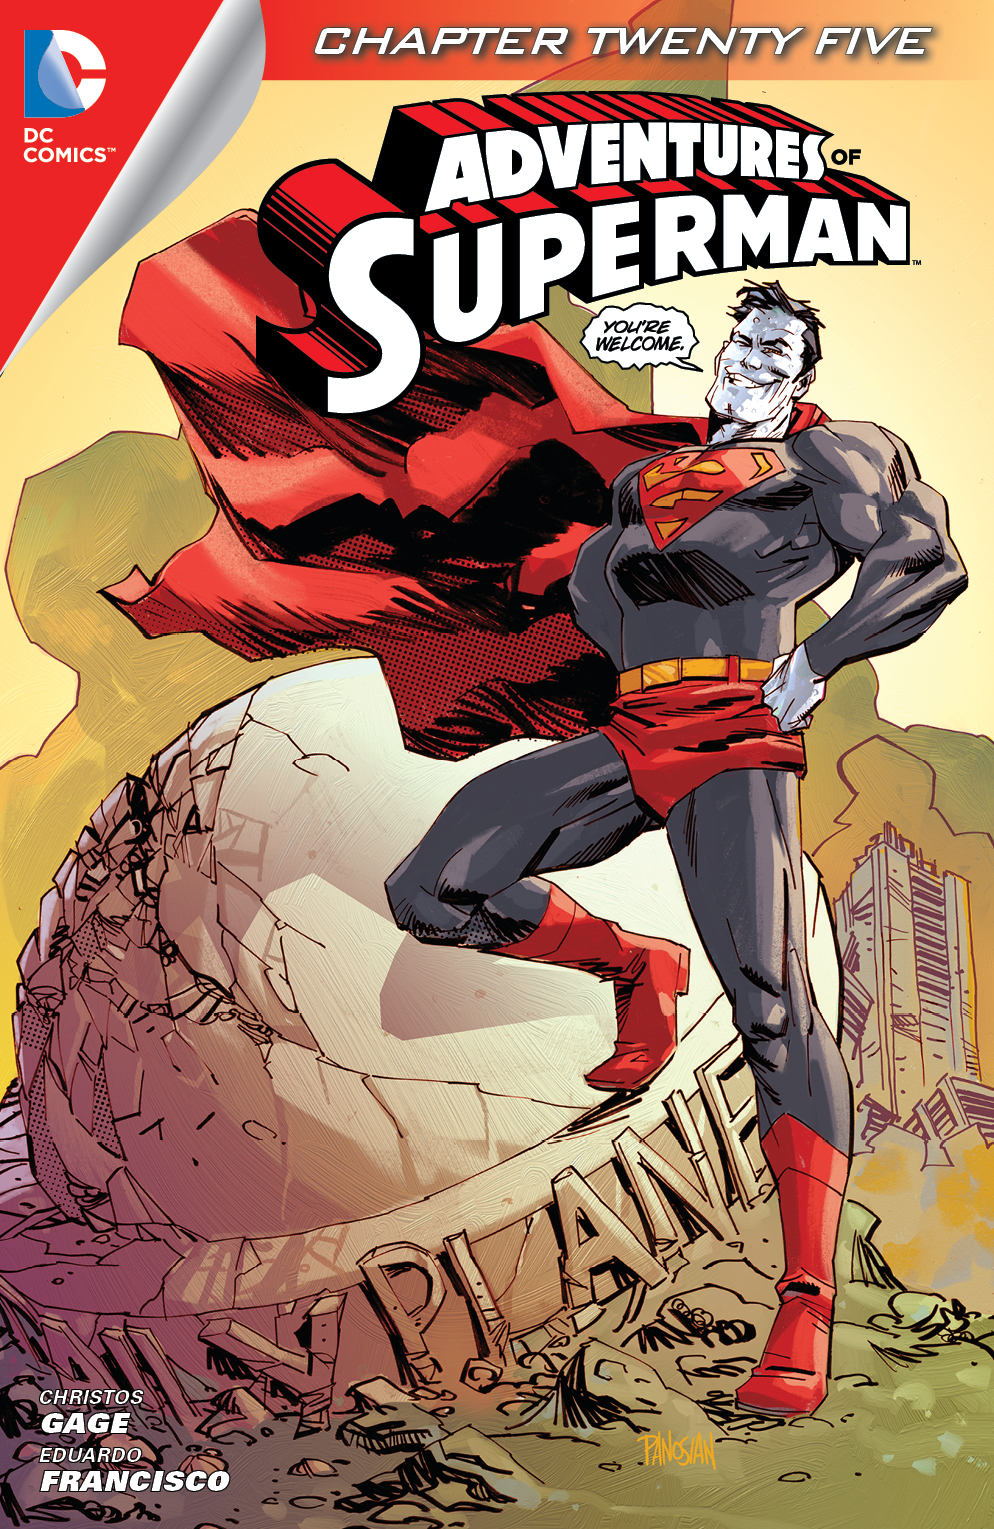 Adventures of Superman (2013-) #25 preview images